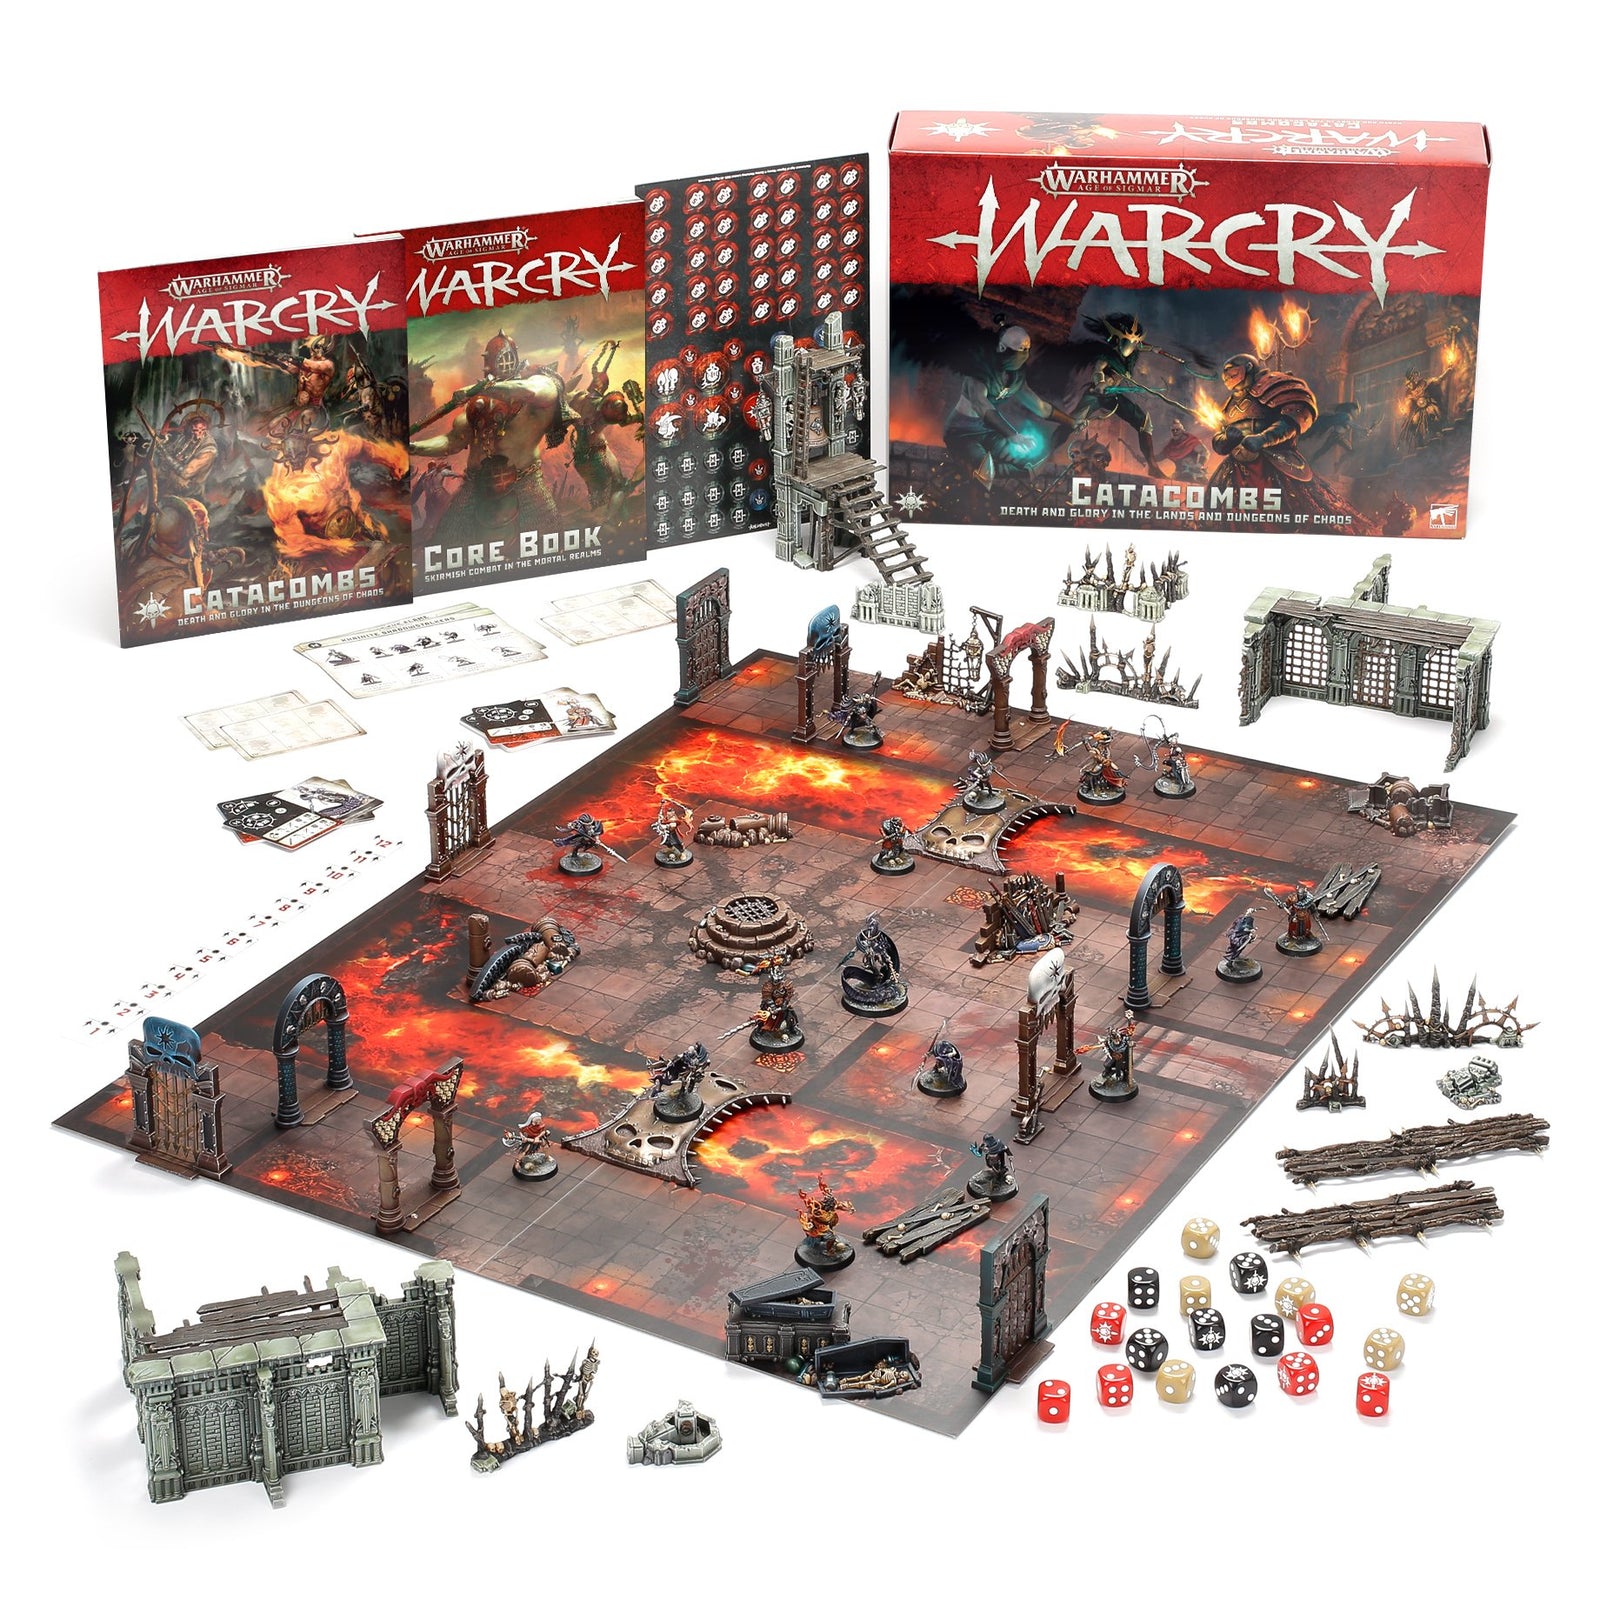 Product Image for Warcry: Catacombs